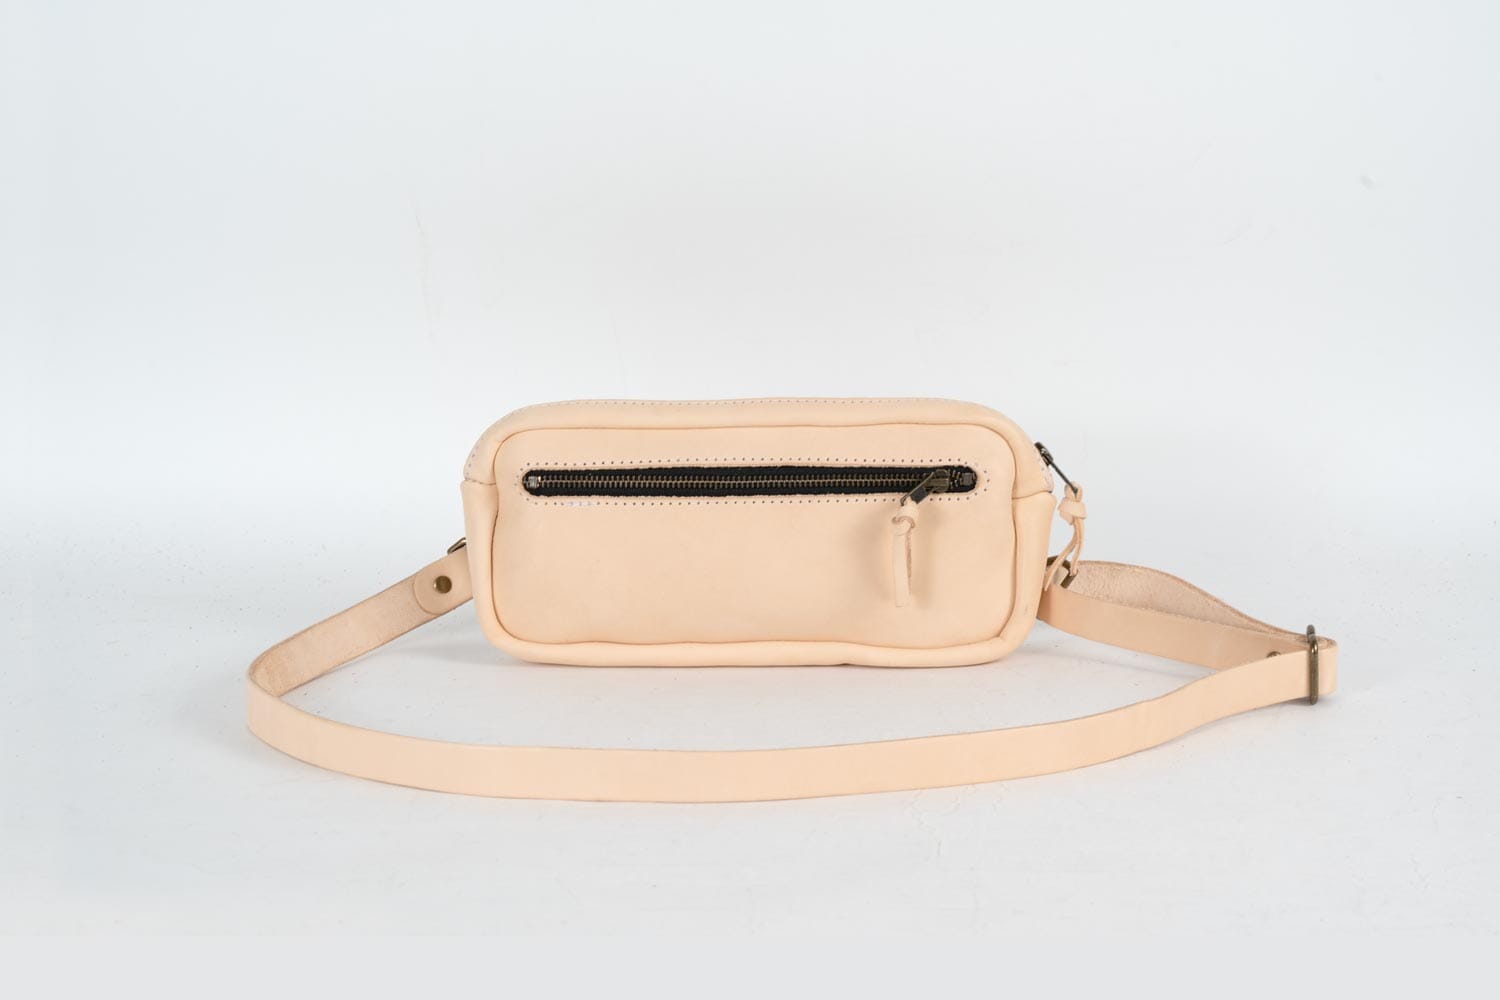 LEATHER FANNY PACK / LEATHER WAIST BAG - DELUXE - NATURAL VEG TAN (RTS)